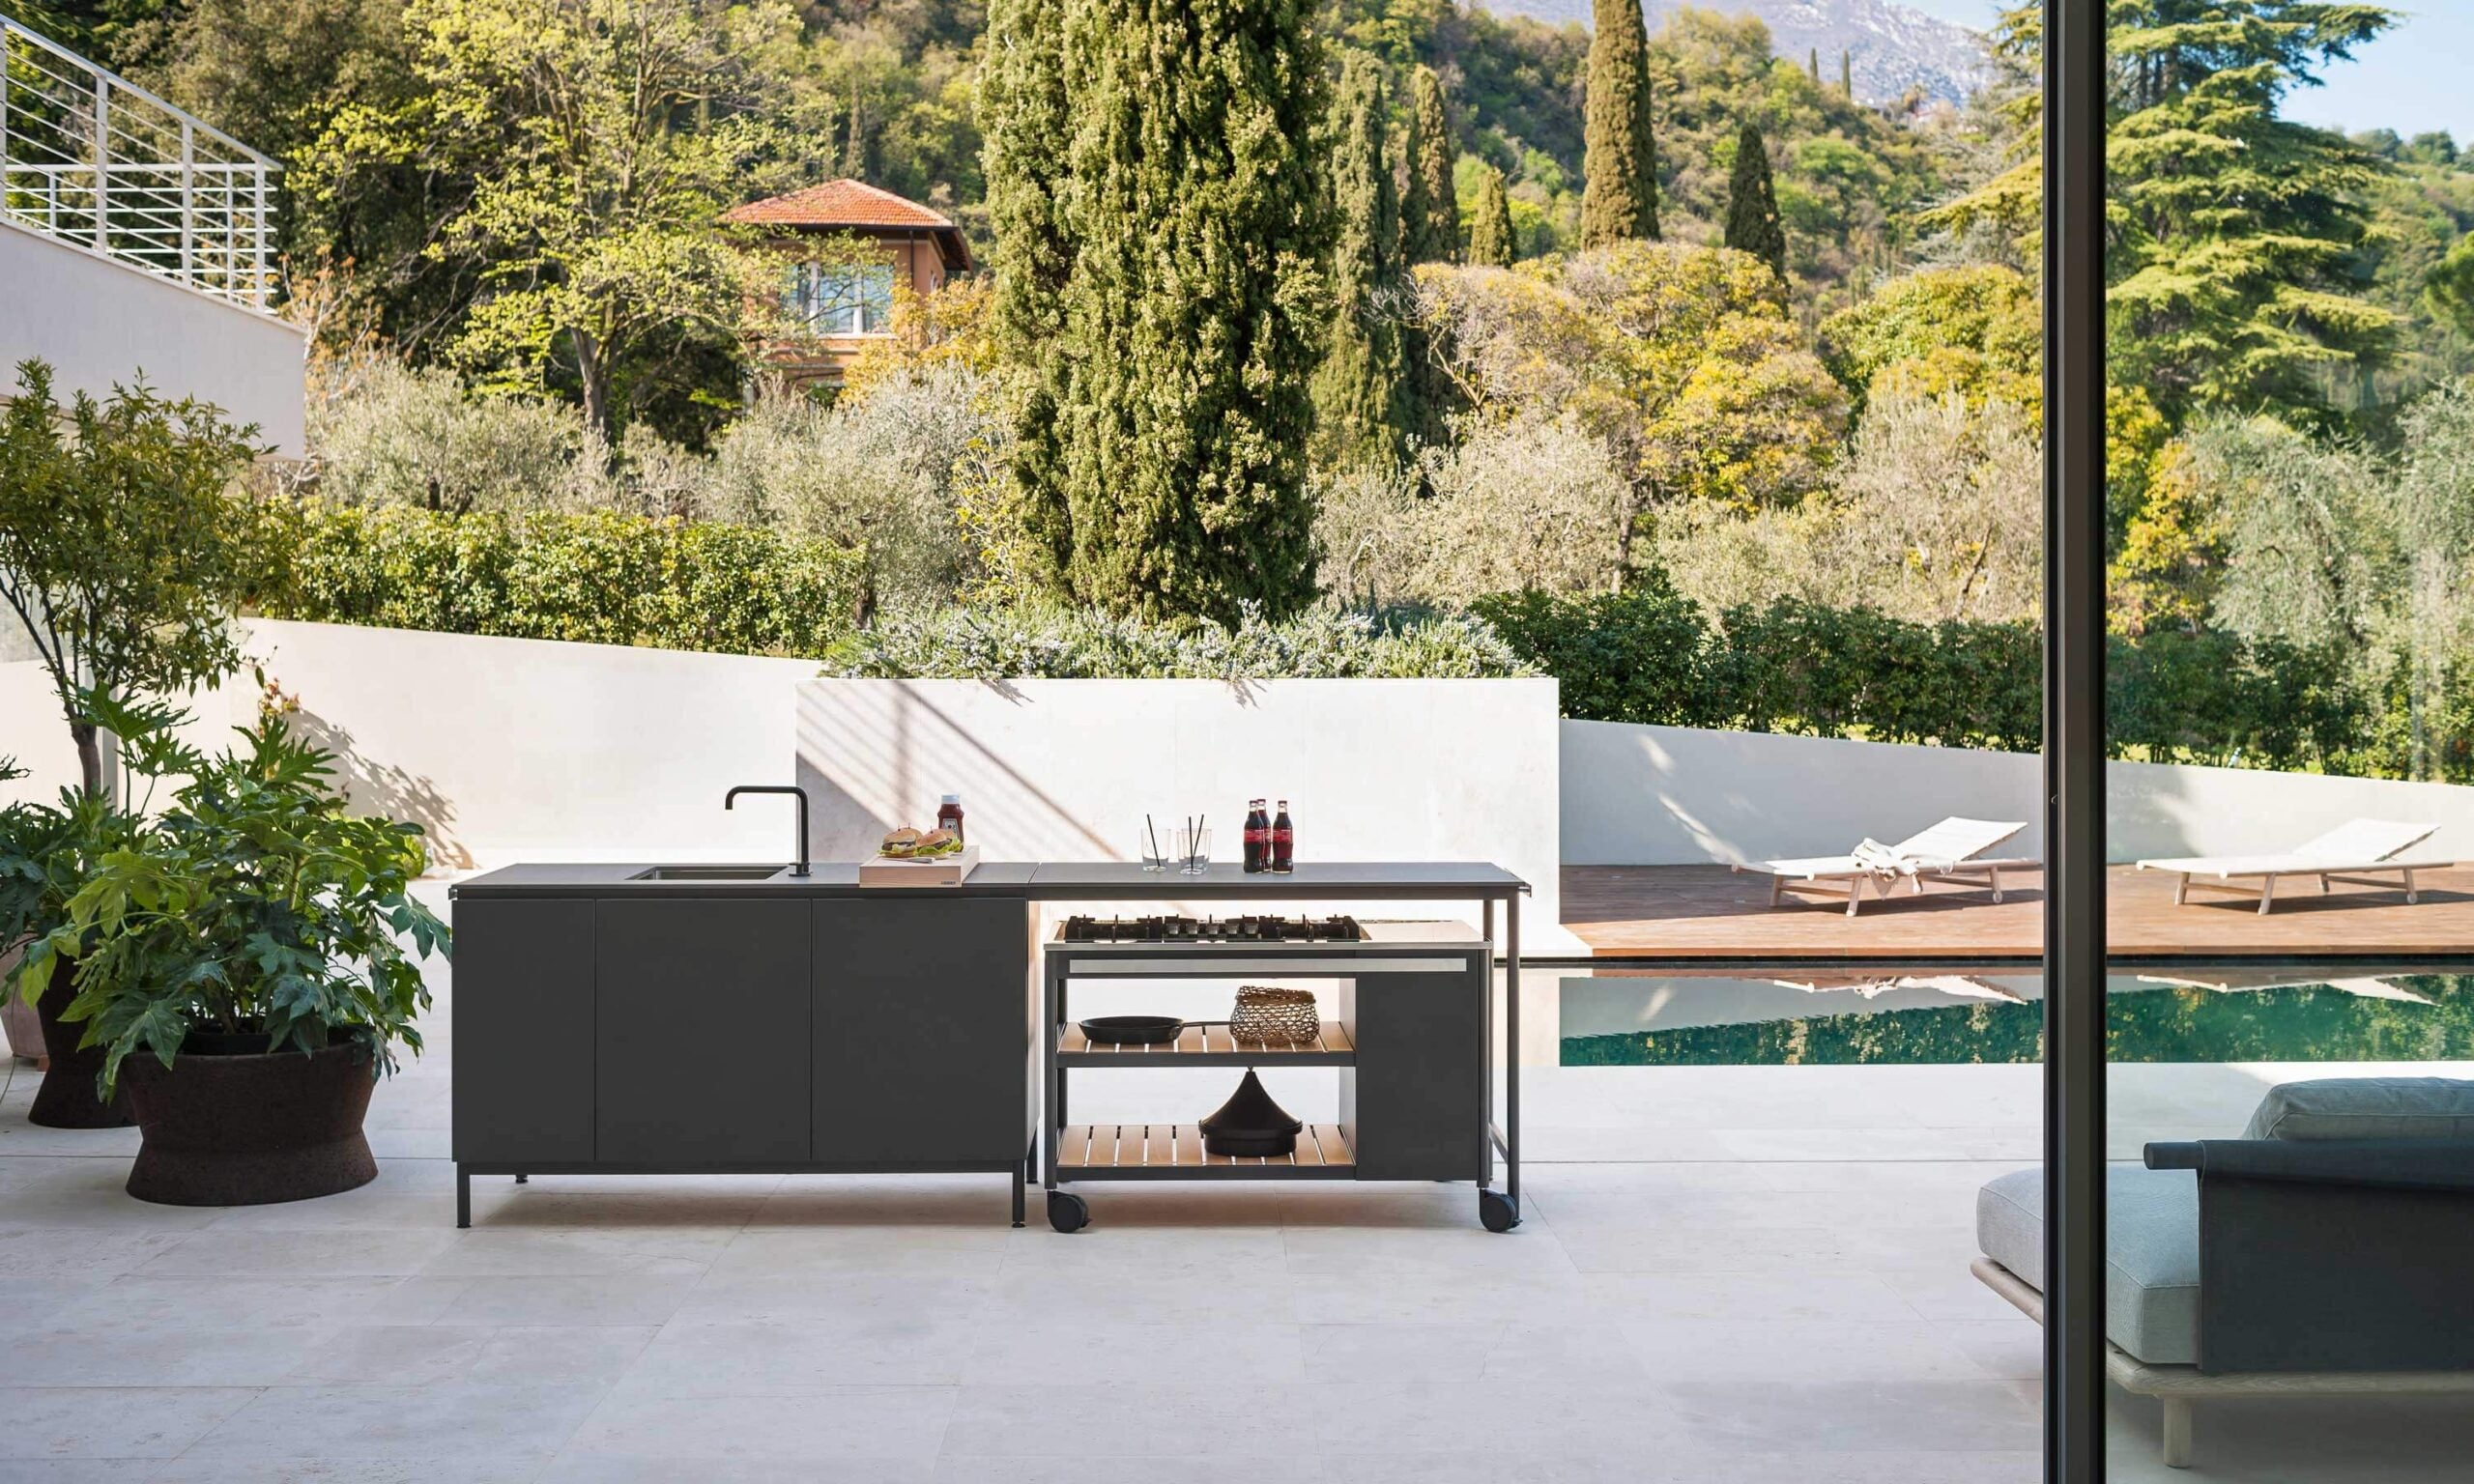 Complete NORMA outdoor kitchen from RODA, including freestanding island module.